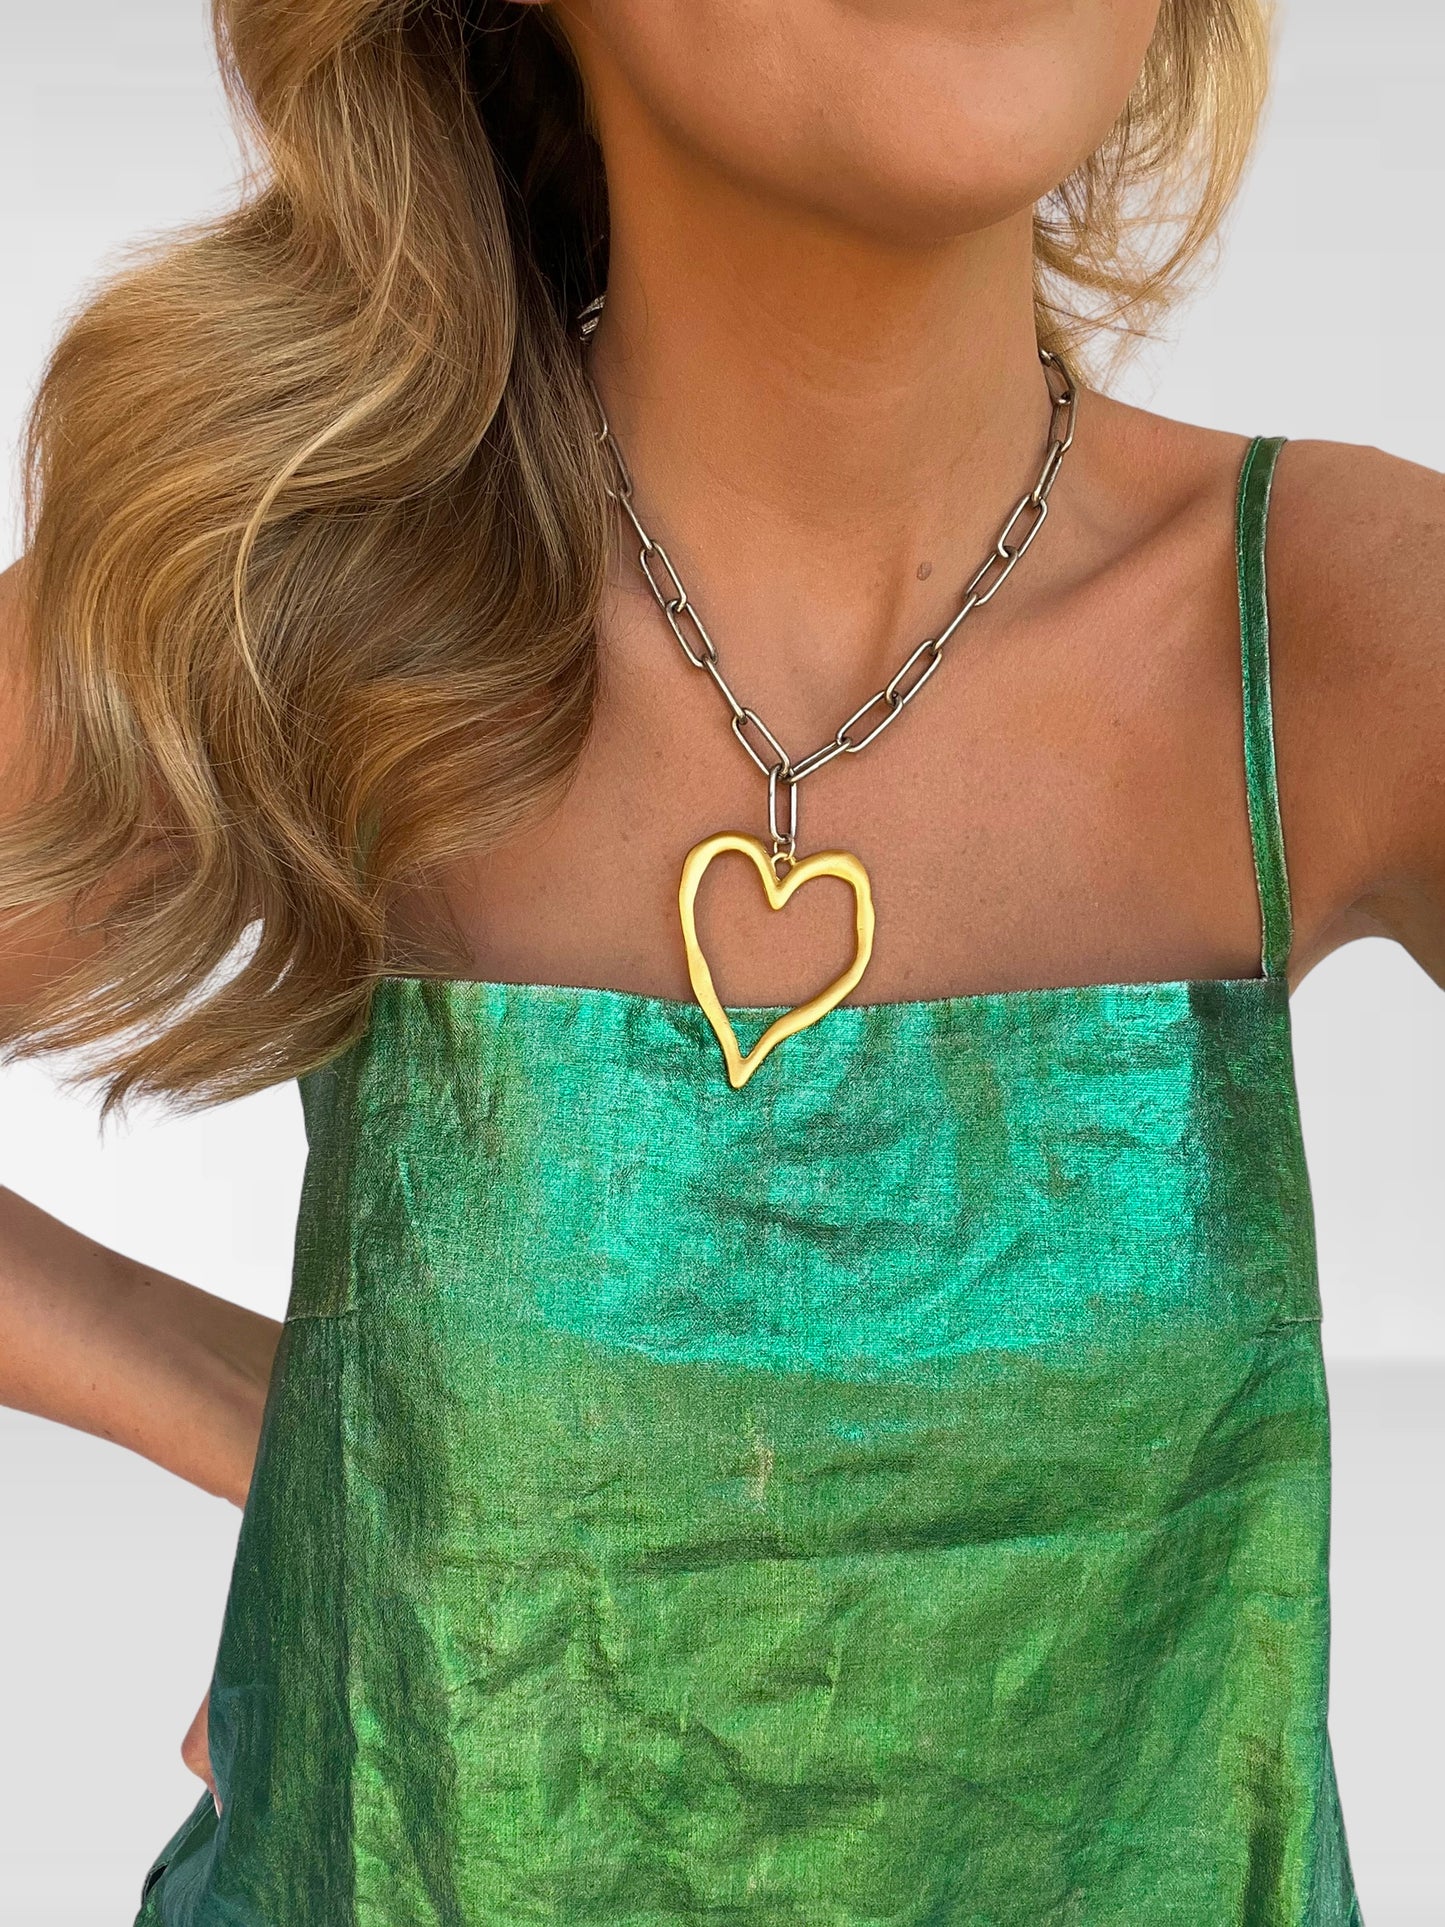 Silver Statement Heart Necklace